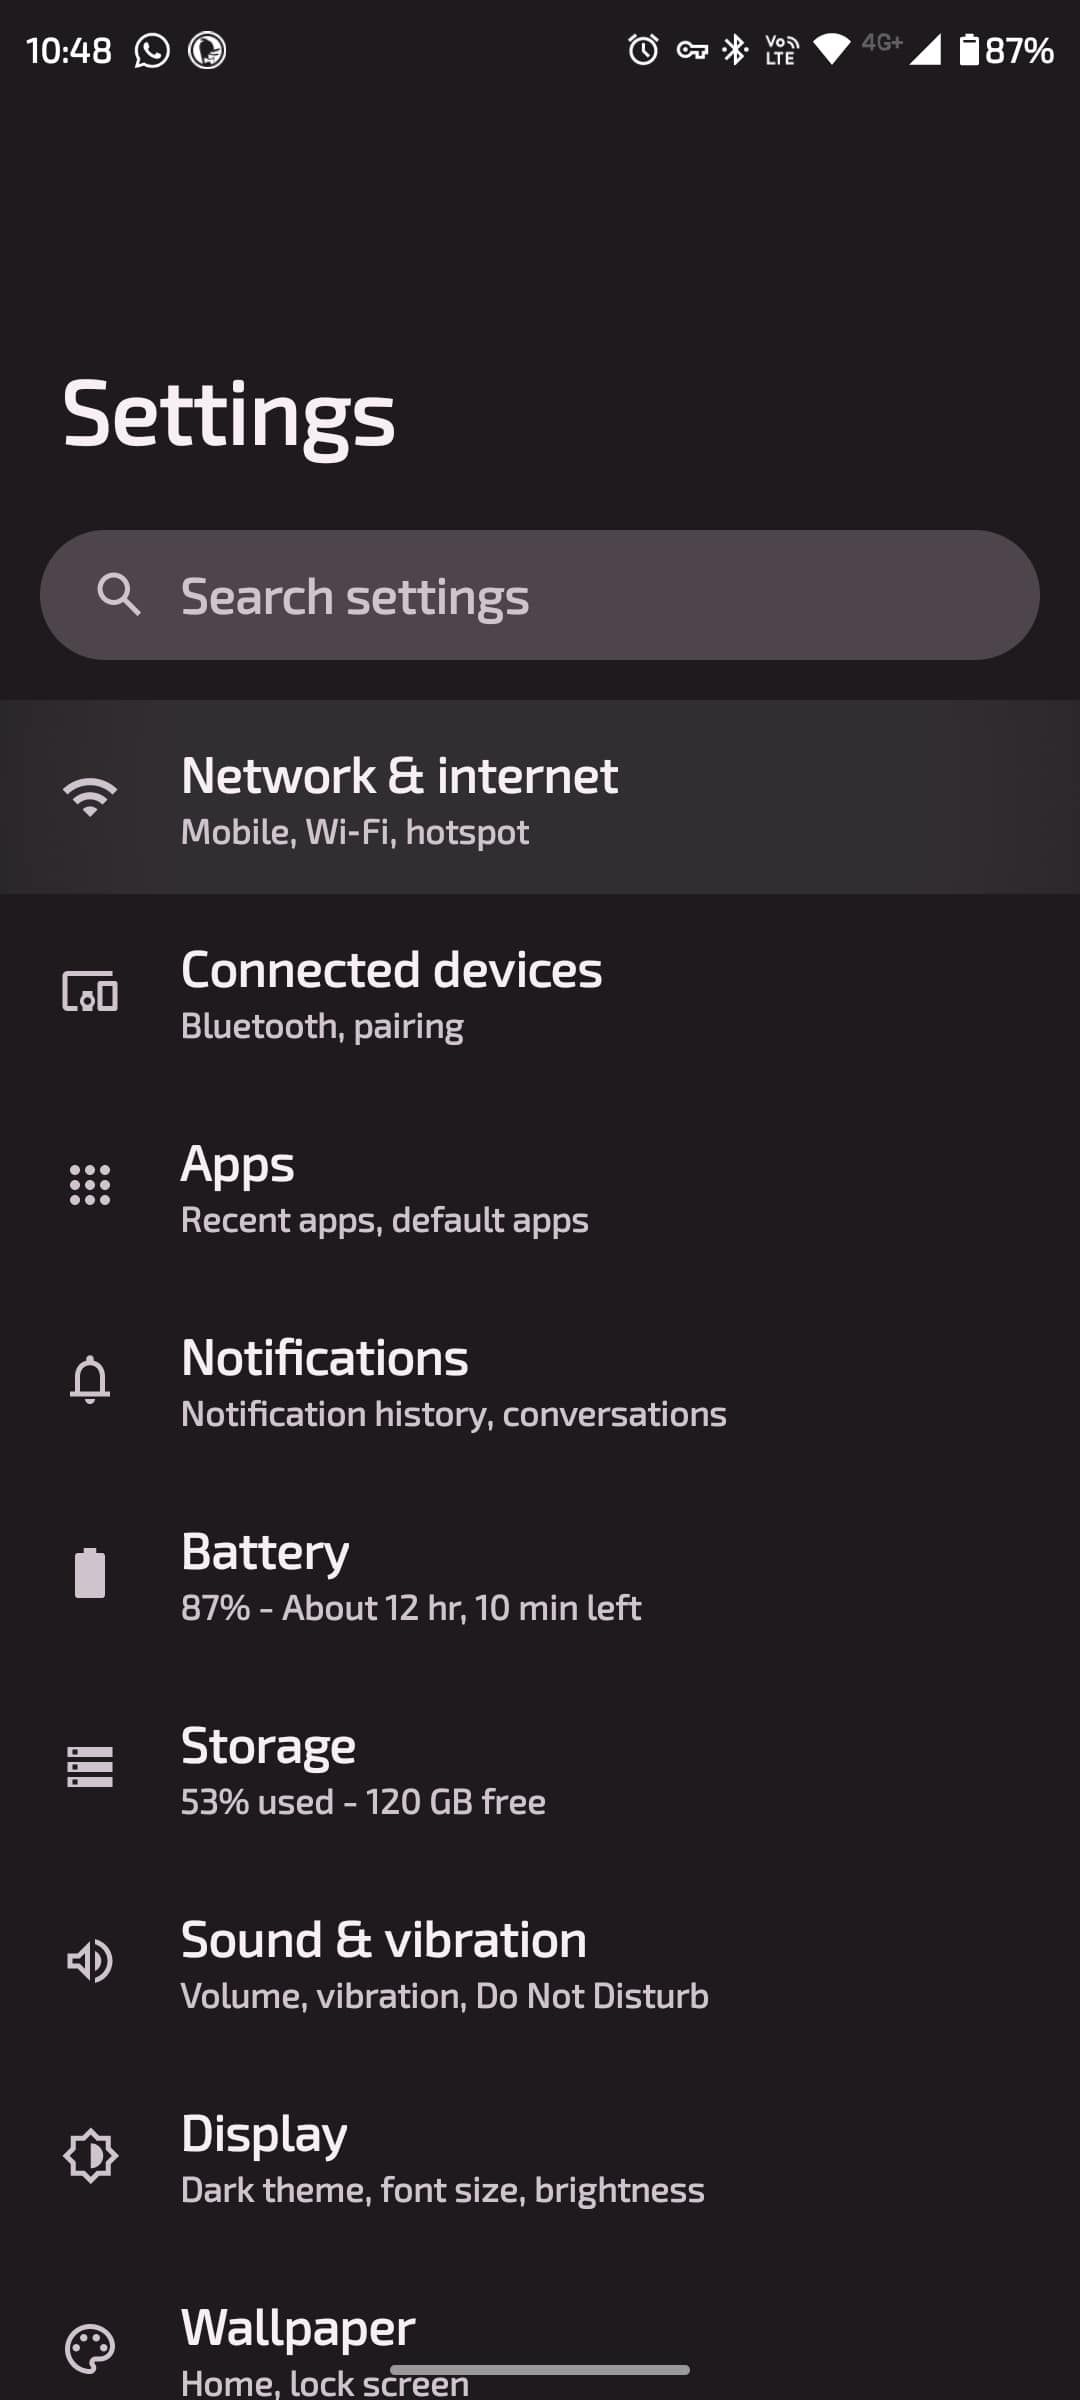 Network and internet option highlighted in settings